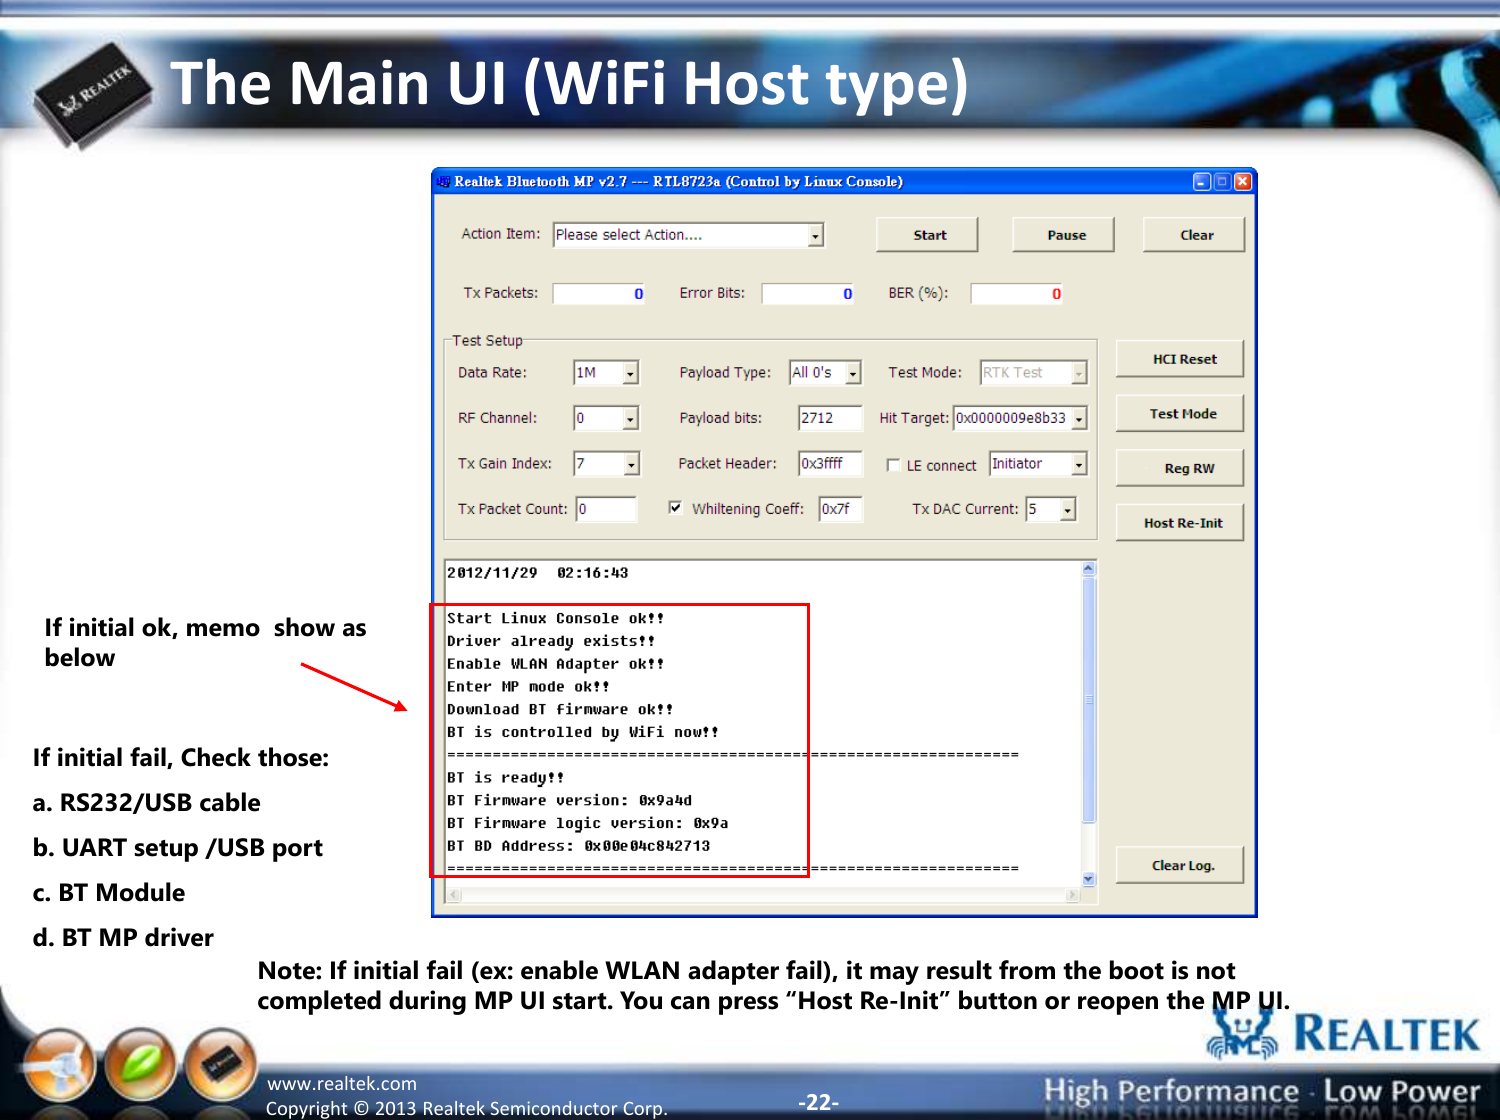 -22- Copyright ©  2013 Realtek Semiconductor Corp. www.realtek.com The Main UI (WiFi Host type) If initial ok, memo  show as below If initial fail, Check those: a. RS232/USB cable b. UART setup /USB port c. BT Module d. BT MP driver Note: If initial fail (ex: enable WLAN adapter fail), it may result from the boot is not completed during MP UI start. You can press “Host Re-Init” button or reopen the MP UI.  